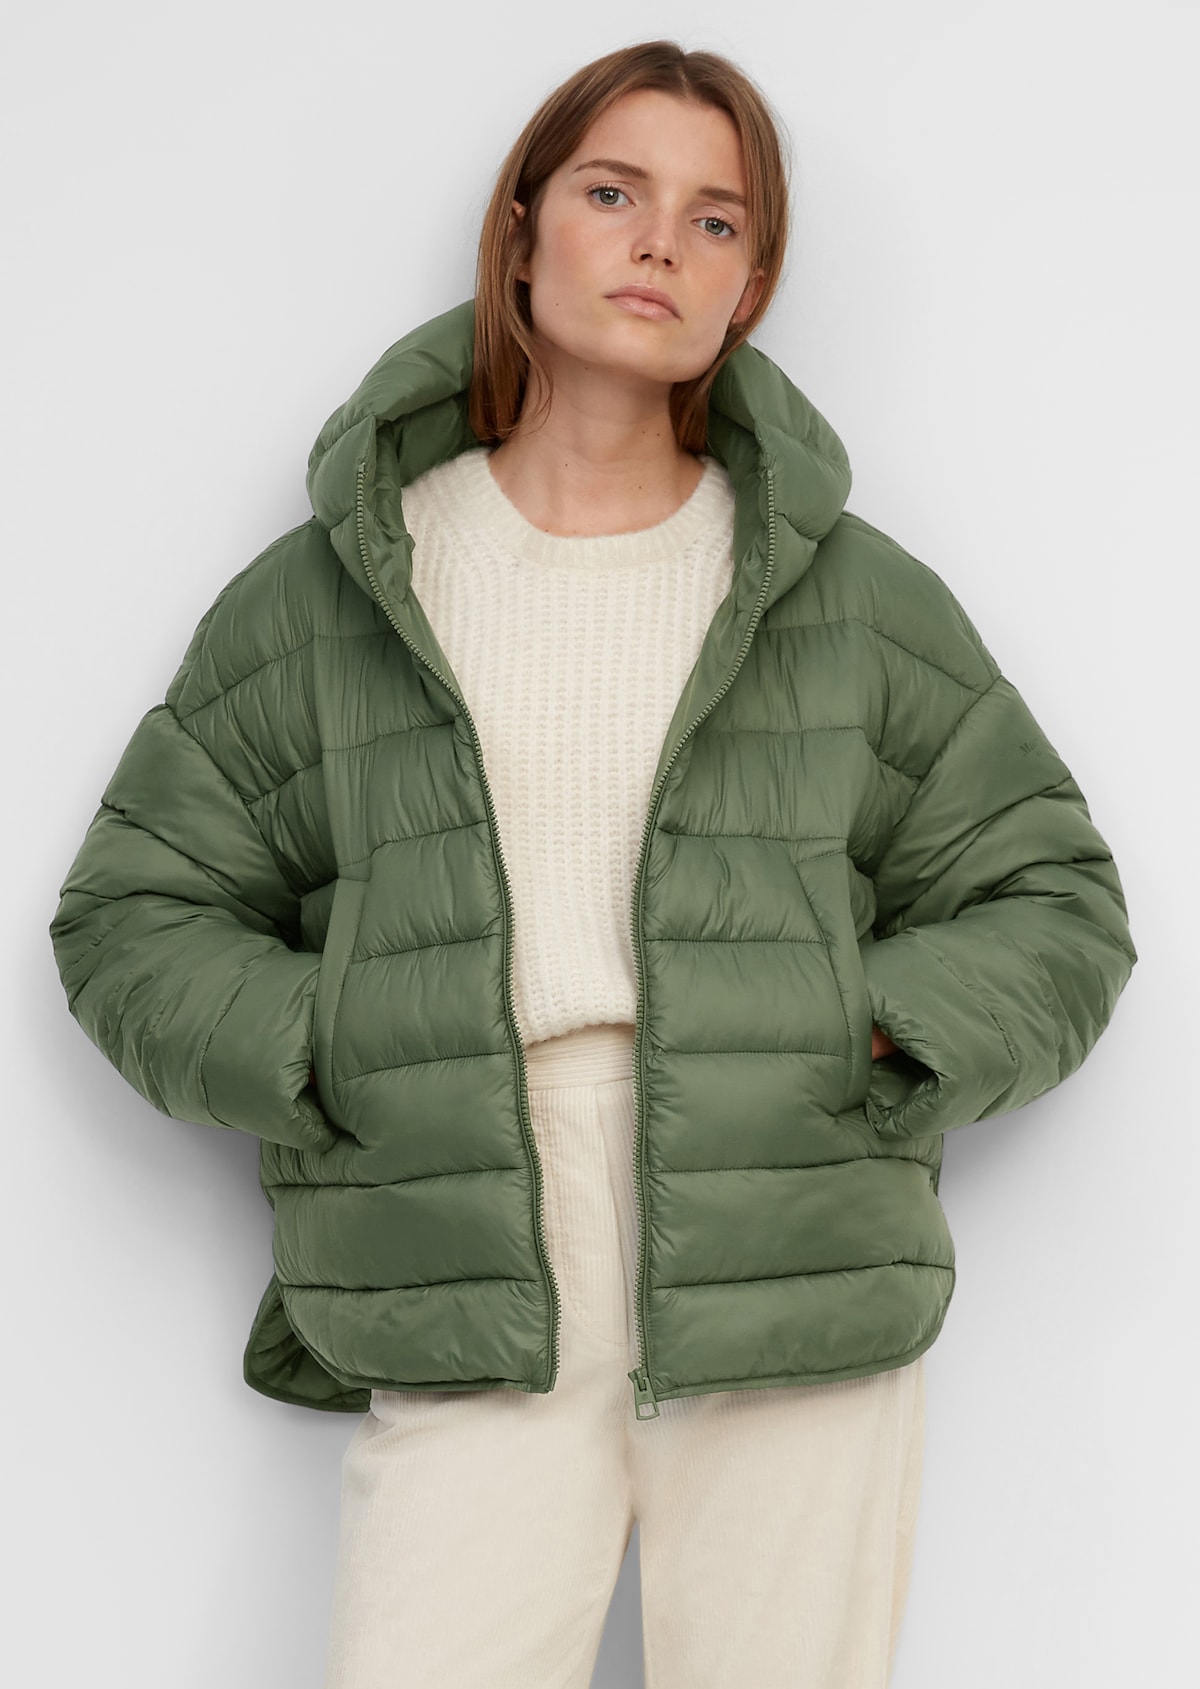 compass entrepreneur Slightly Quilted jacket in the style of a cape Made of recycled nylon fabric - green  | Jackets | MARC O'POLO